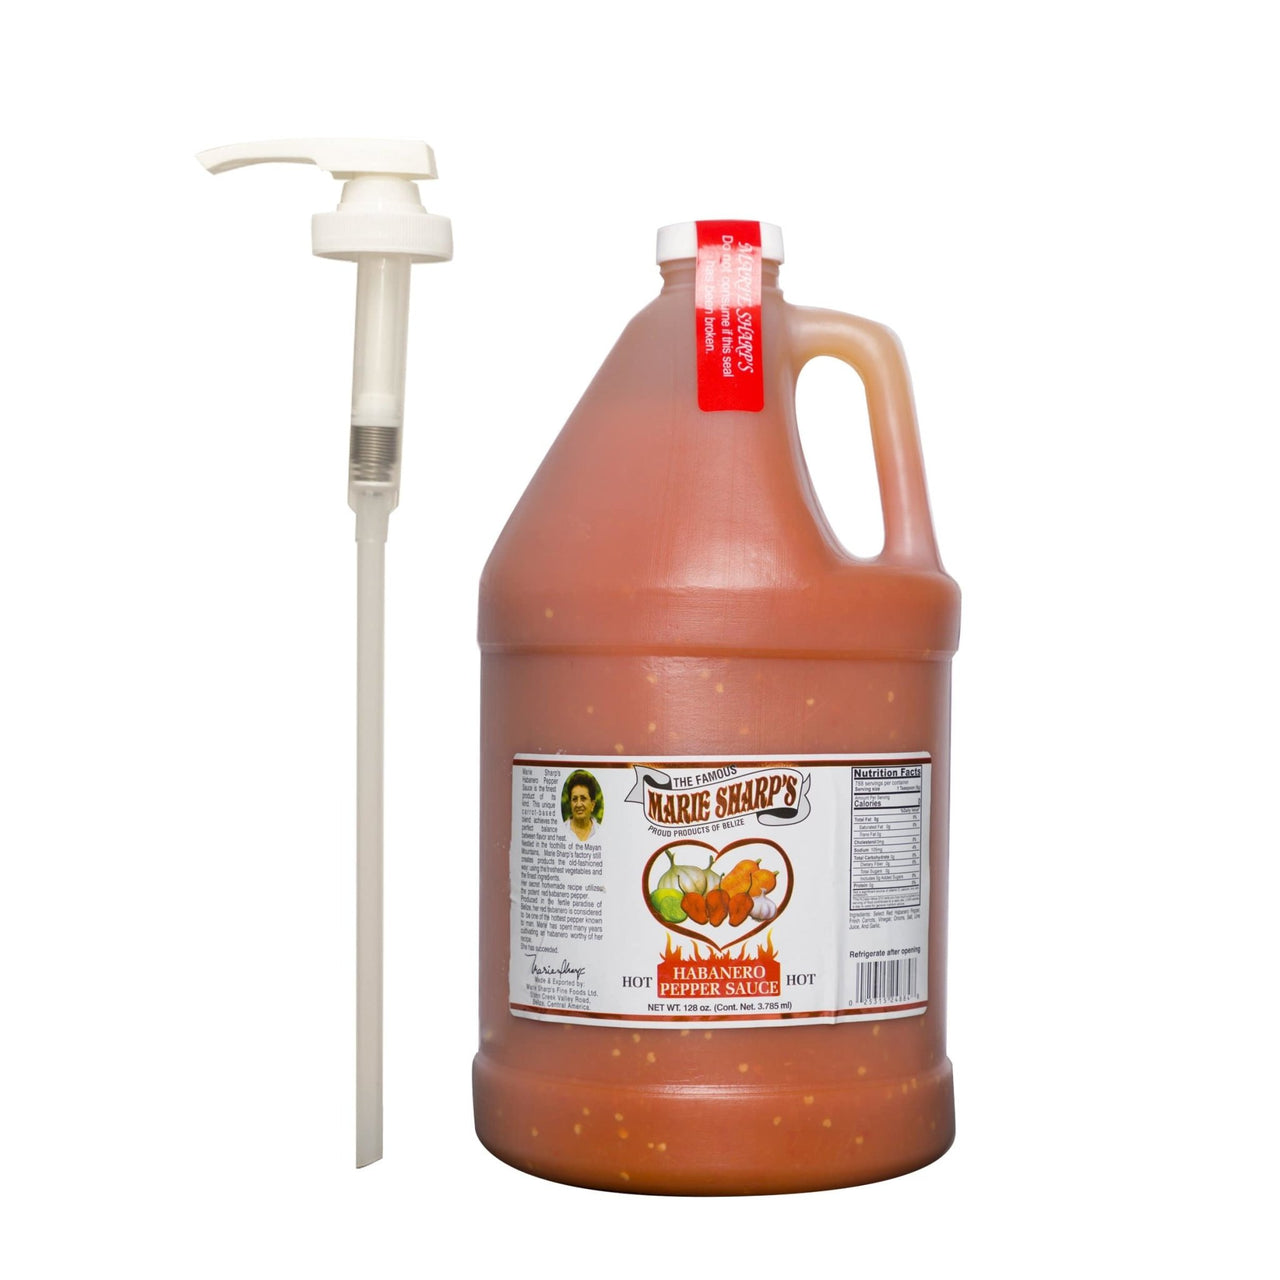 GALLON SIZES | Habanero Pepper Sauces | FREE PUMP INCLUDED! - Marie Sharp's Company Store